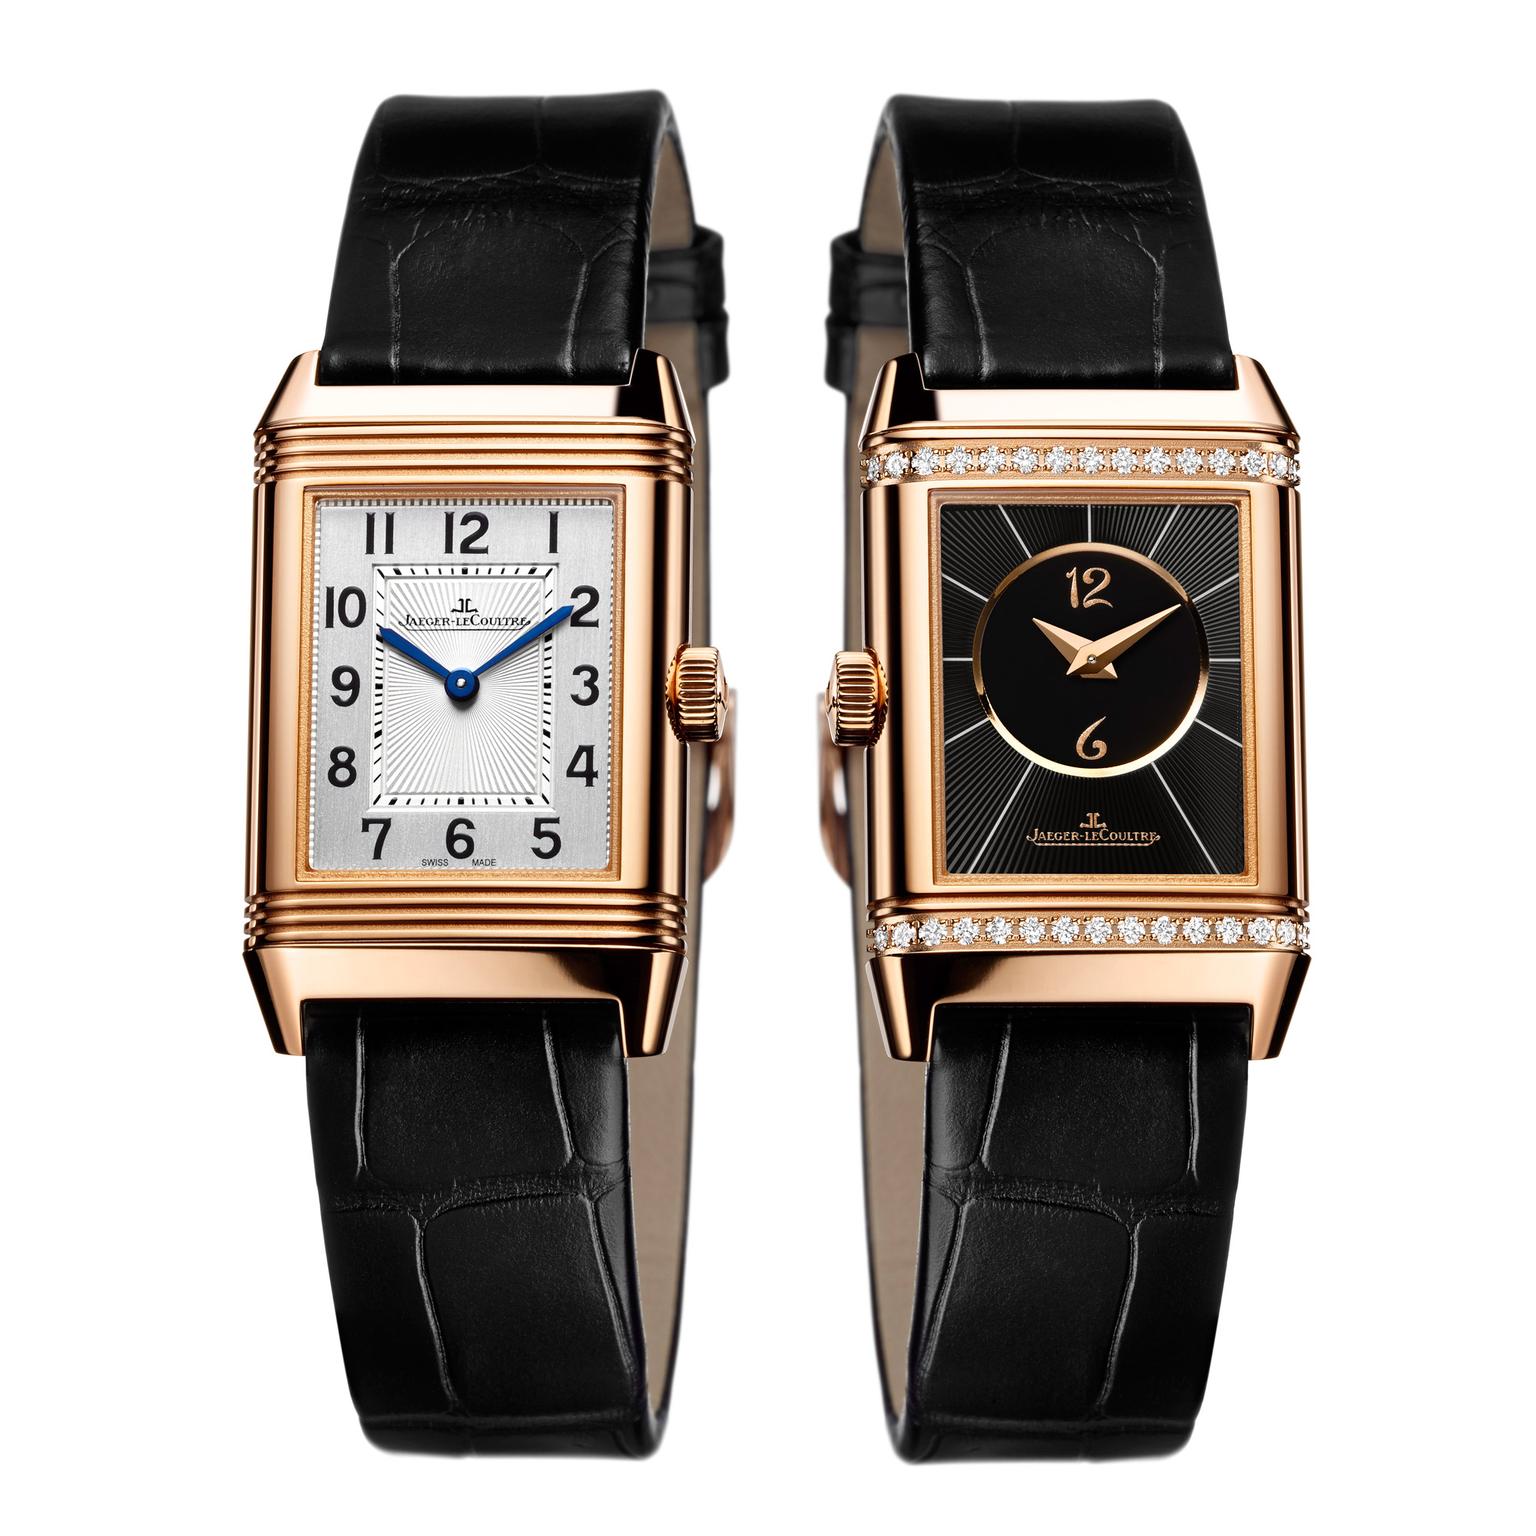 Jaeger-LeCoultre Reverso back and front